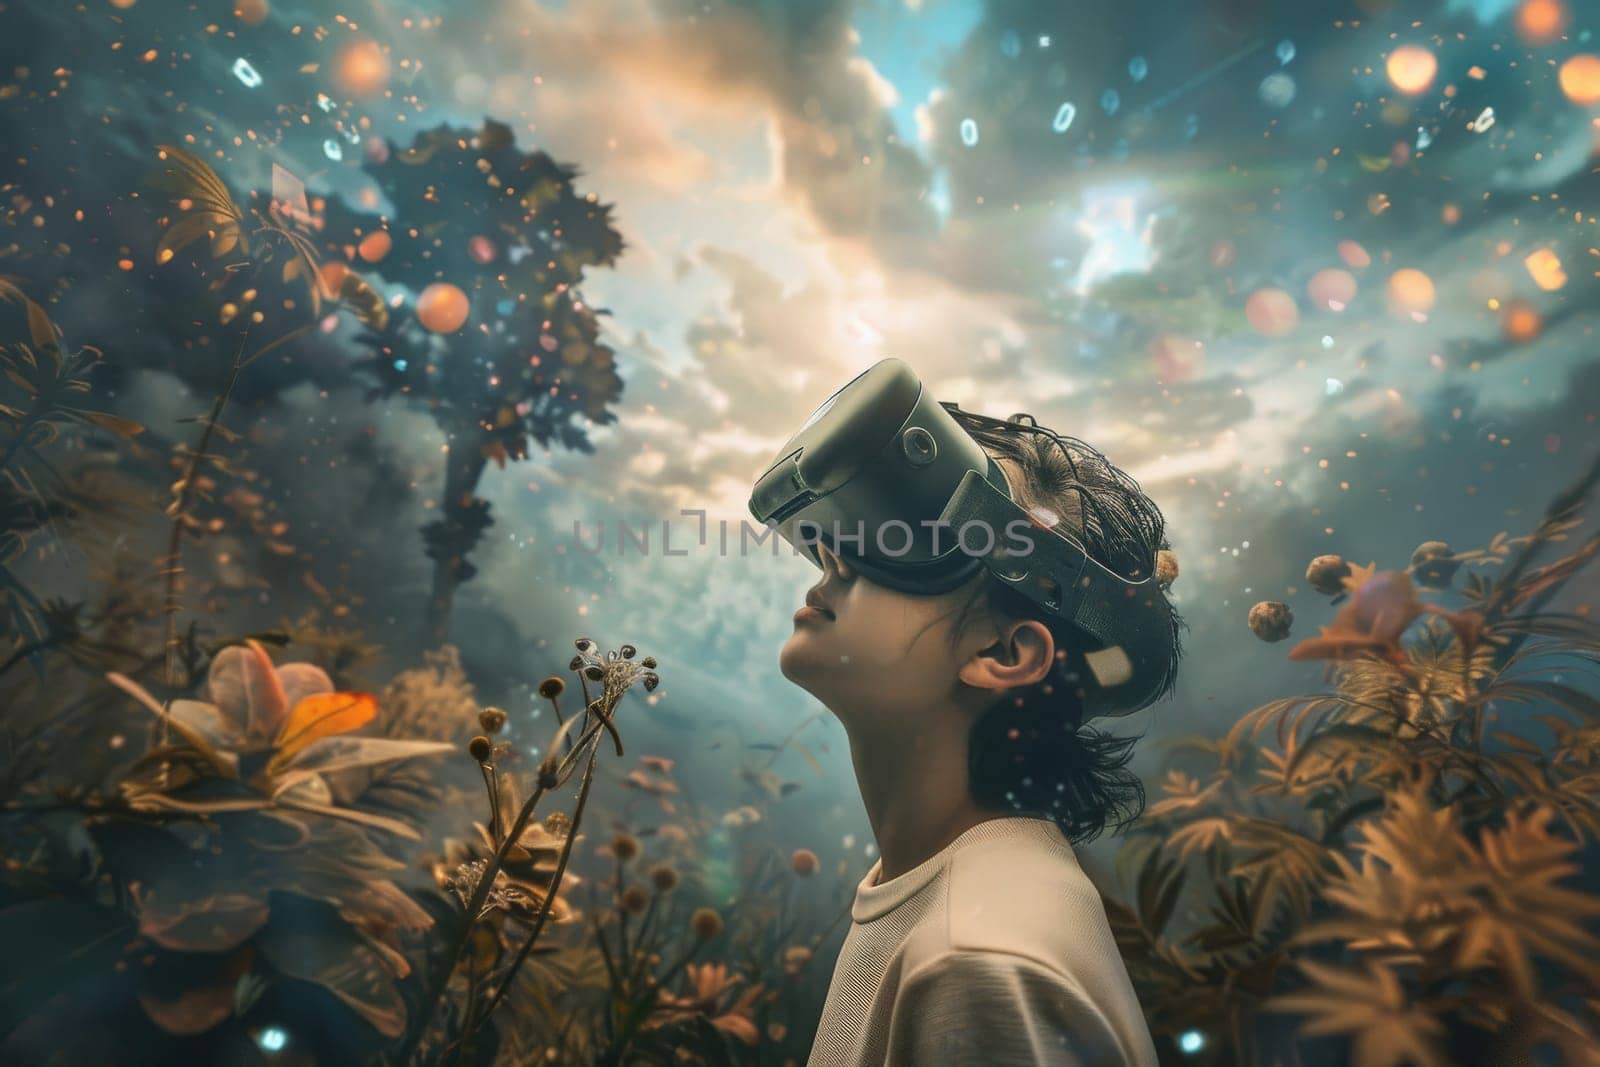 A young girl wearing a virtual reality headset is looking up at the sky. The scene is set in a lush, green field with a tree in the background